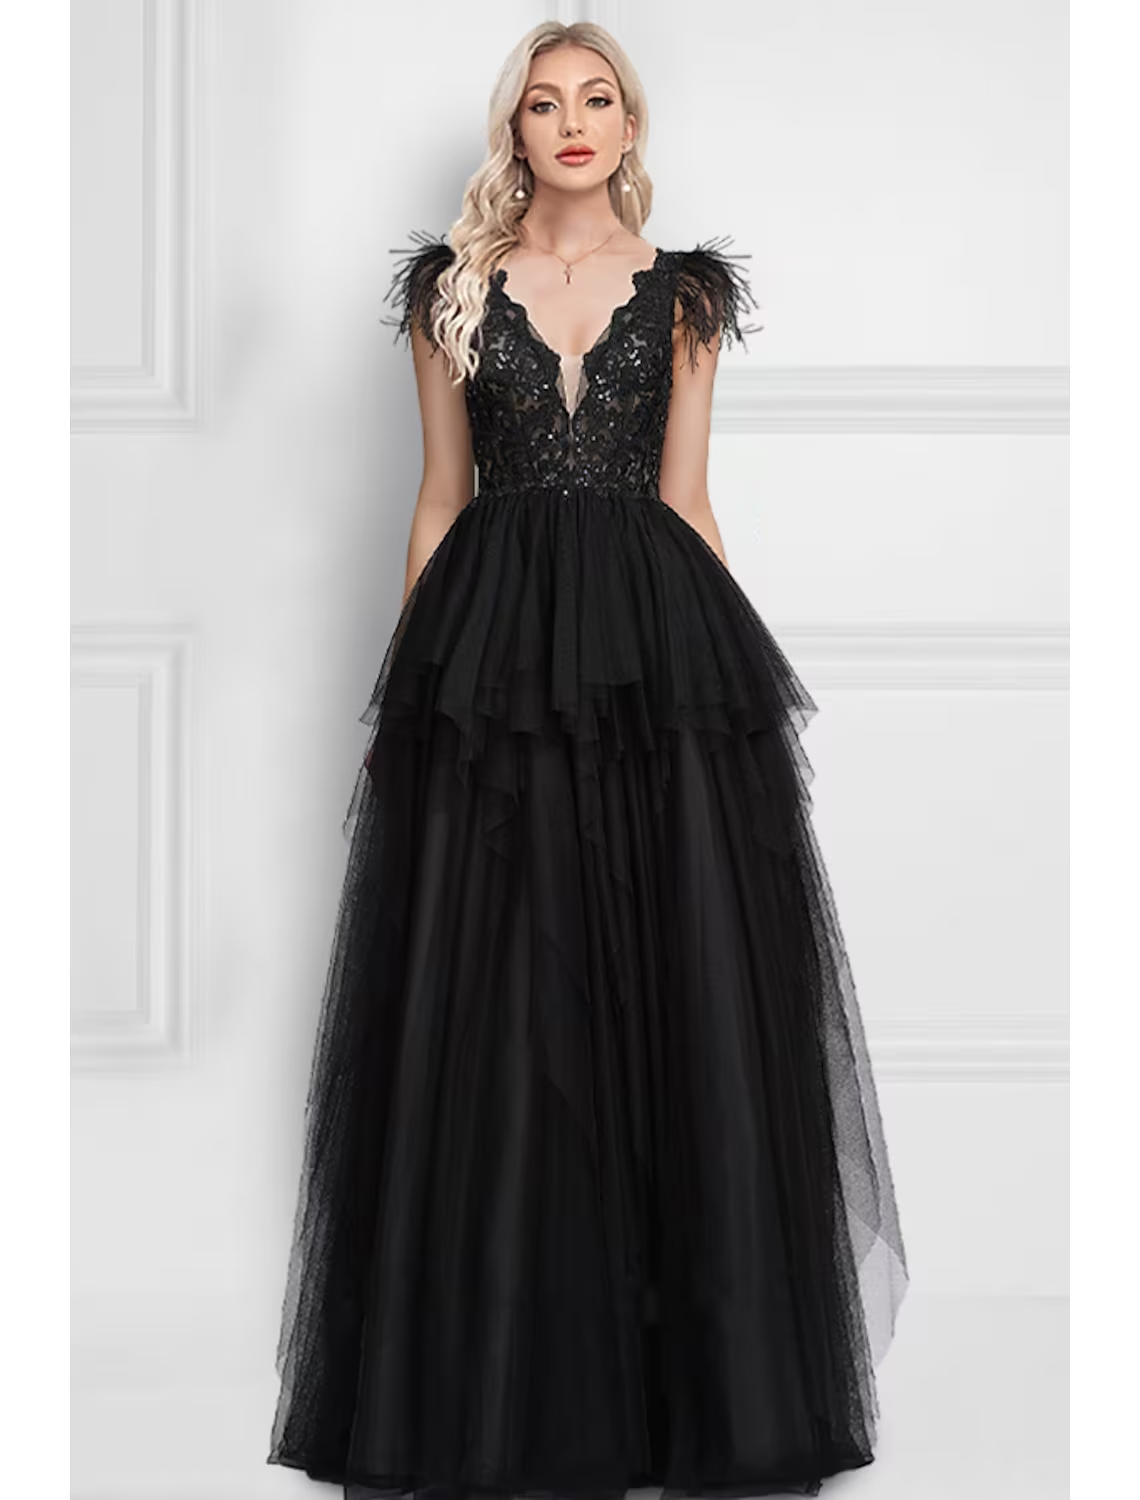 A-Line Prom Dresses Black Dress Wedding Party Floor Length Sleeveless V Neck Tulle with Feather Appliques